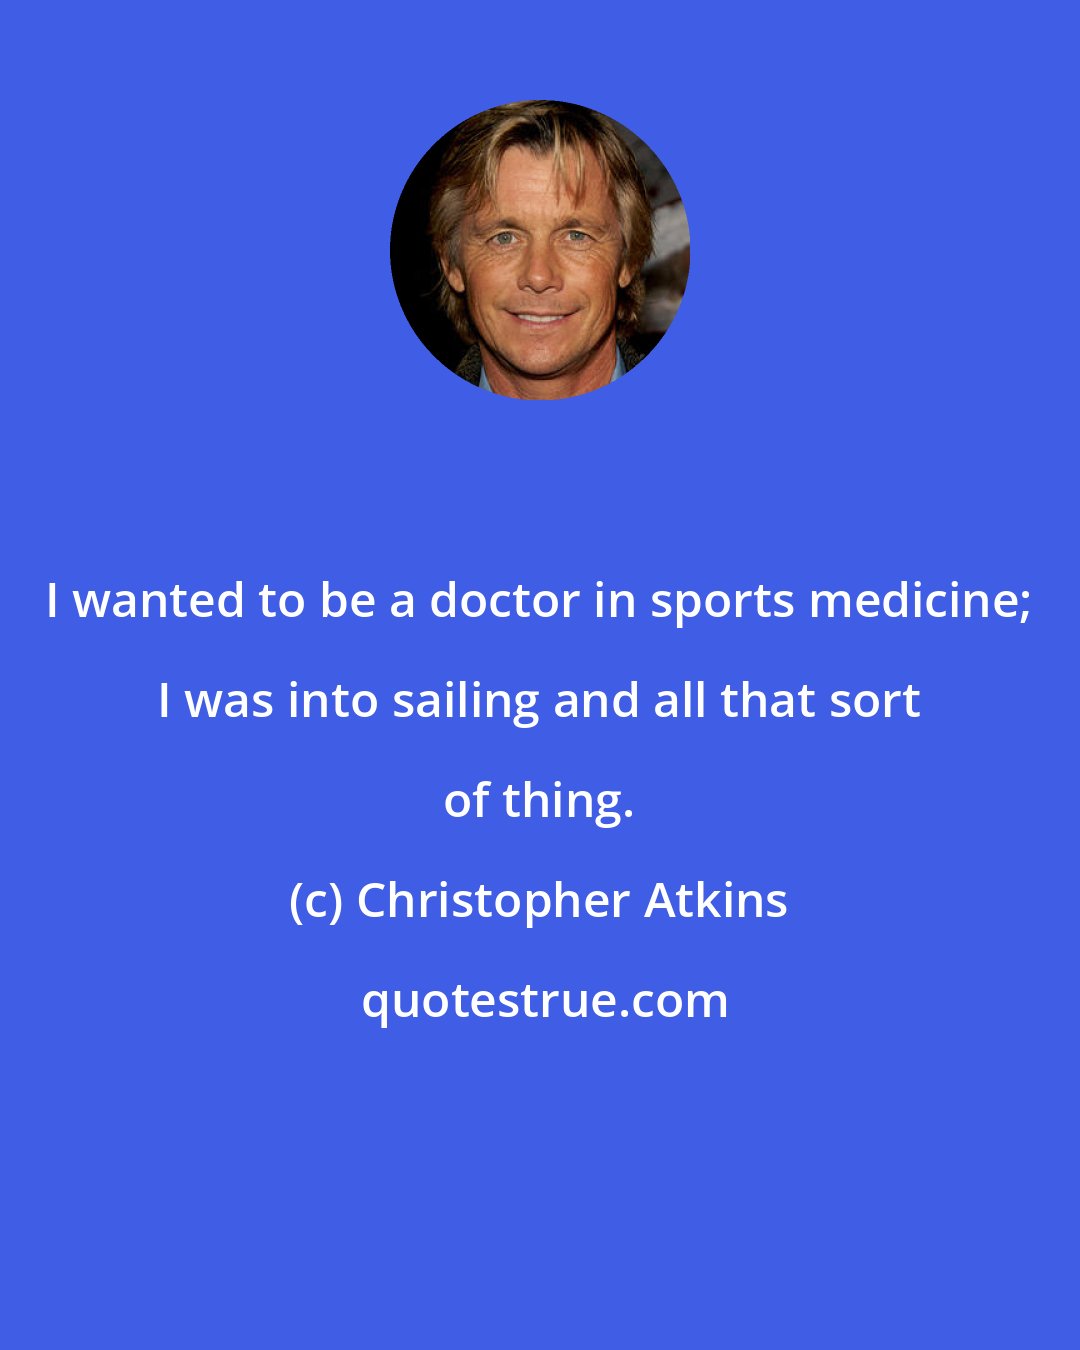 Christopher Atkins: I wanted to be a doctor in sports medicine; I was into sailing and all that sort of thing.